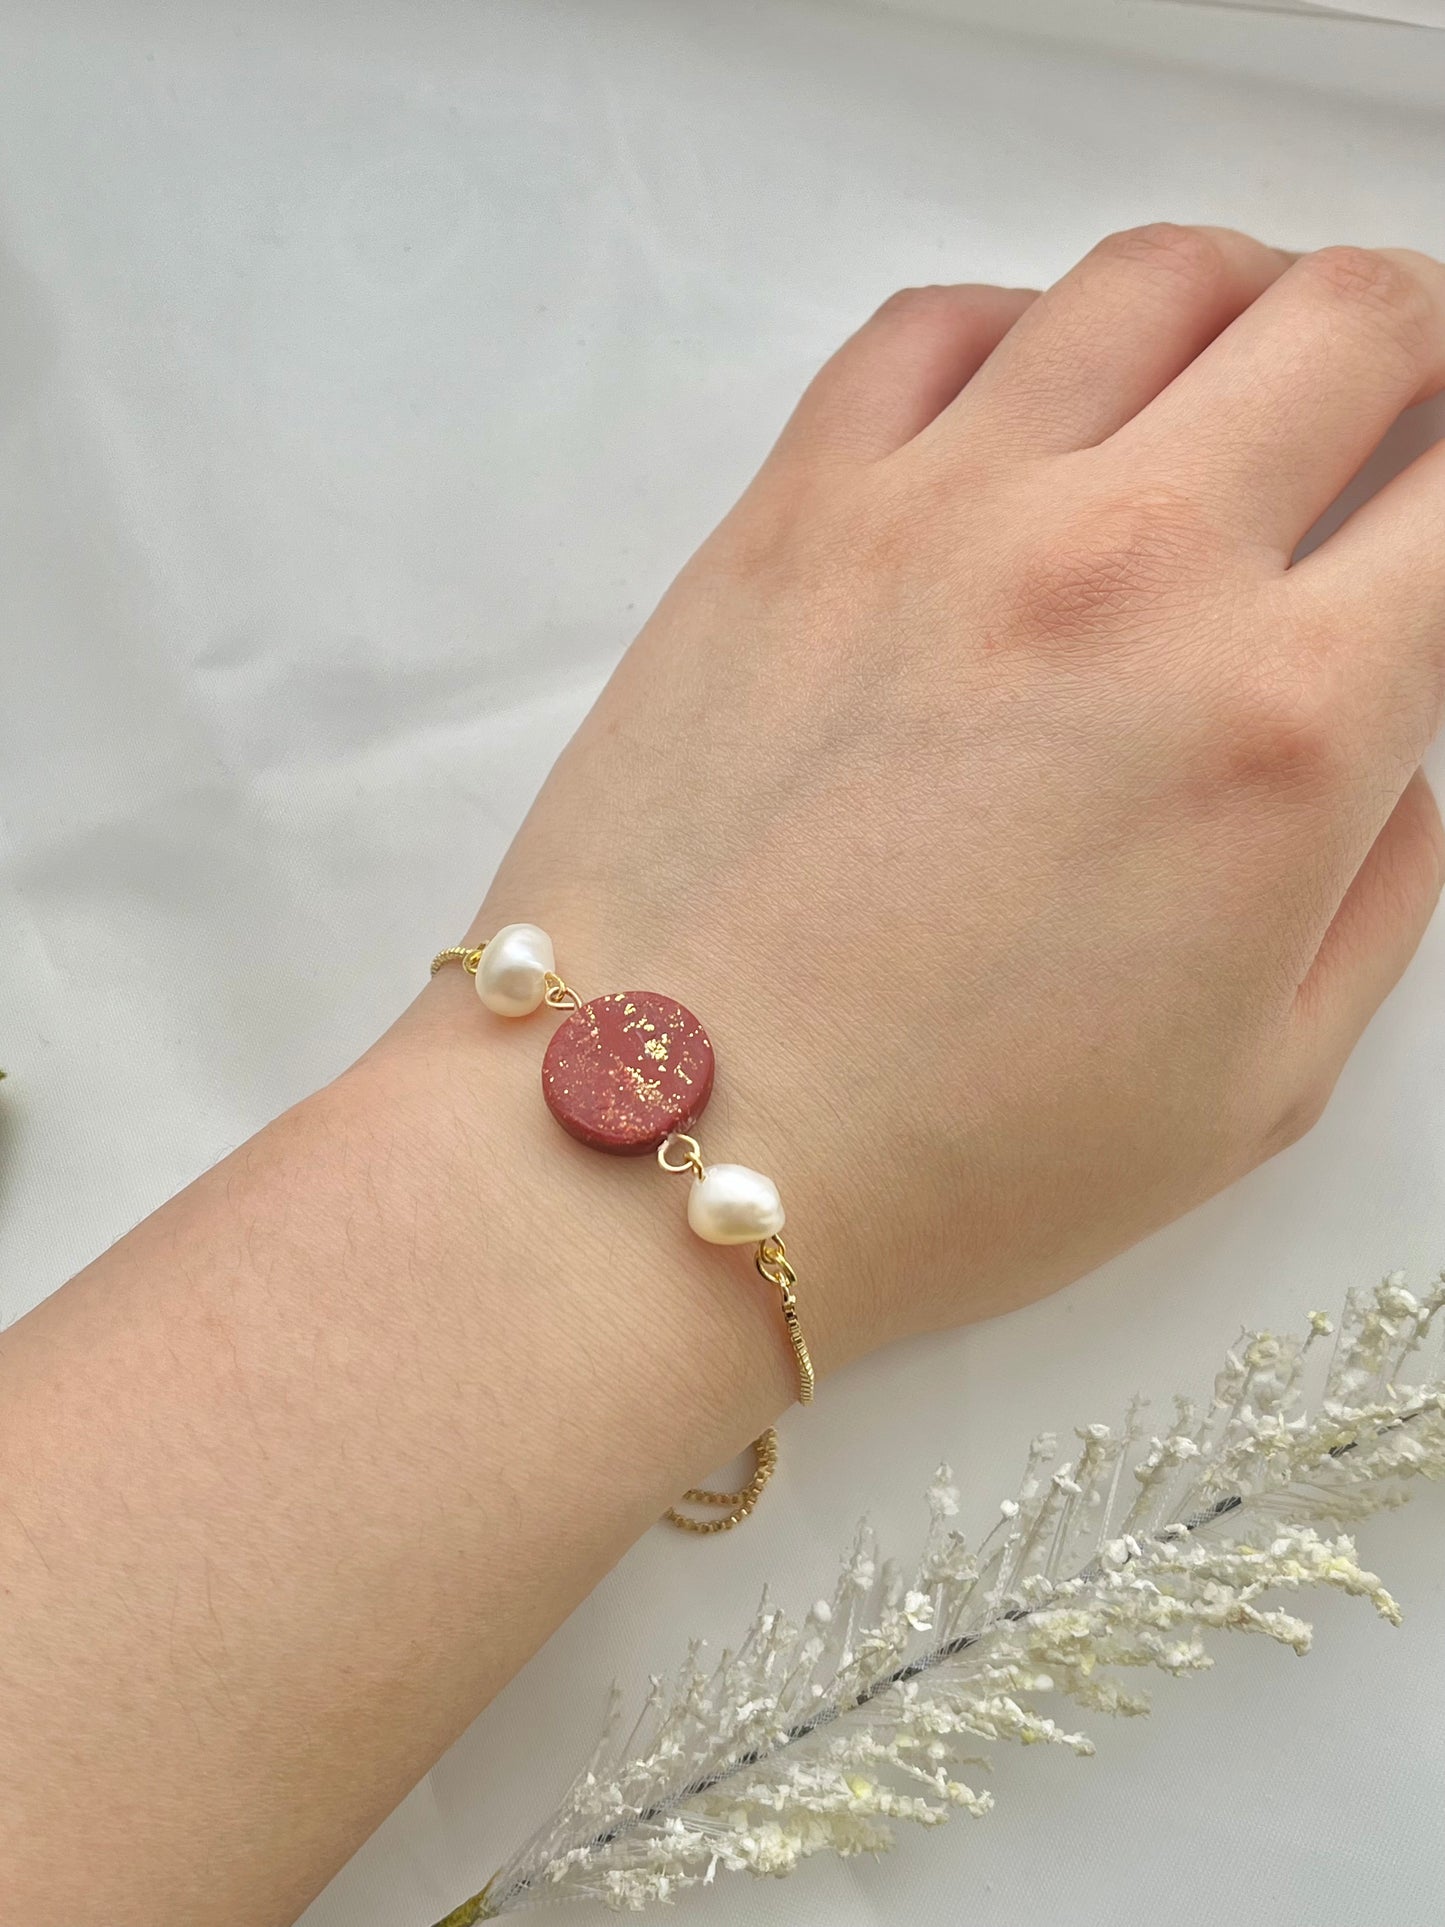 A bracelet with a dark red clay circle with freshwater pearls on either side on a hand